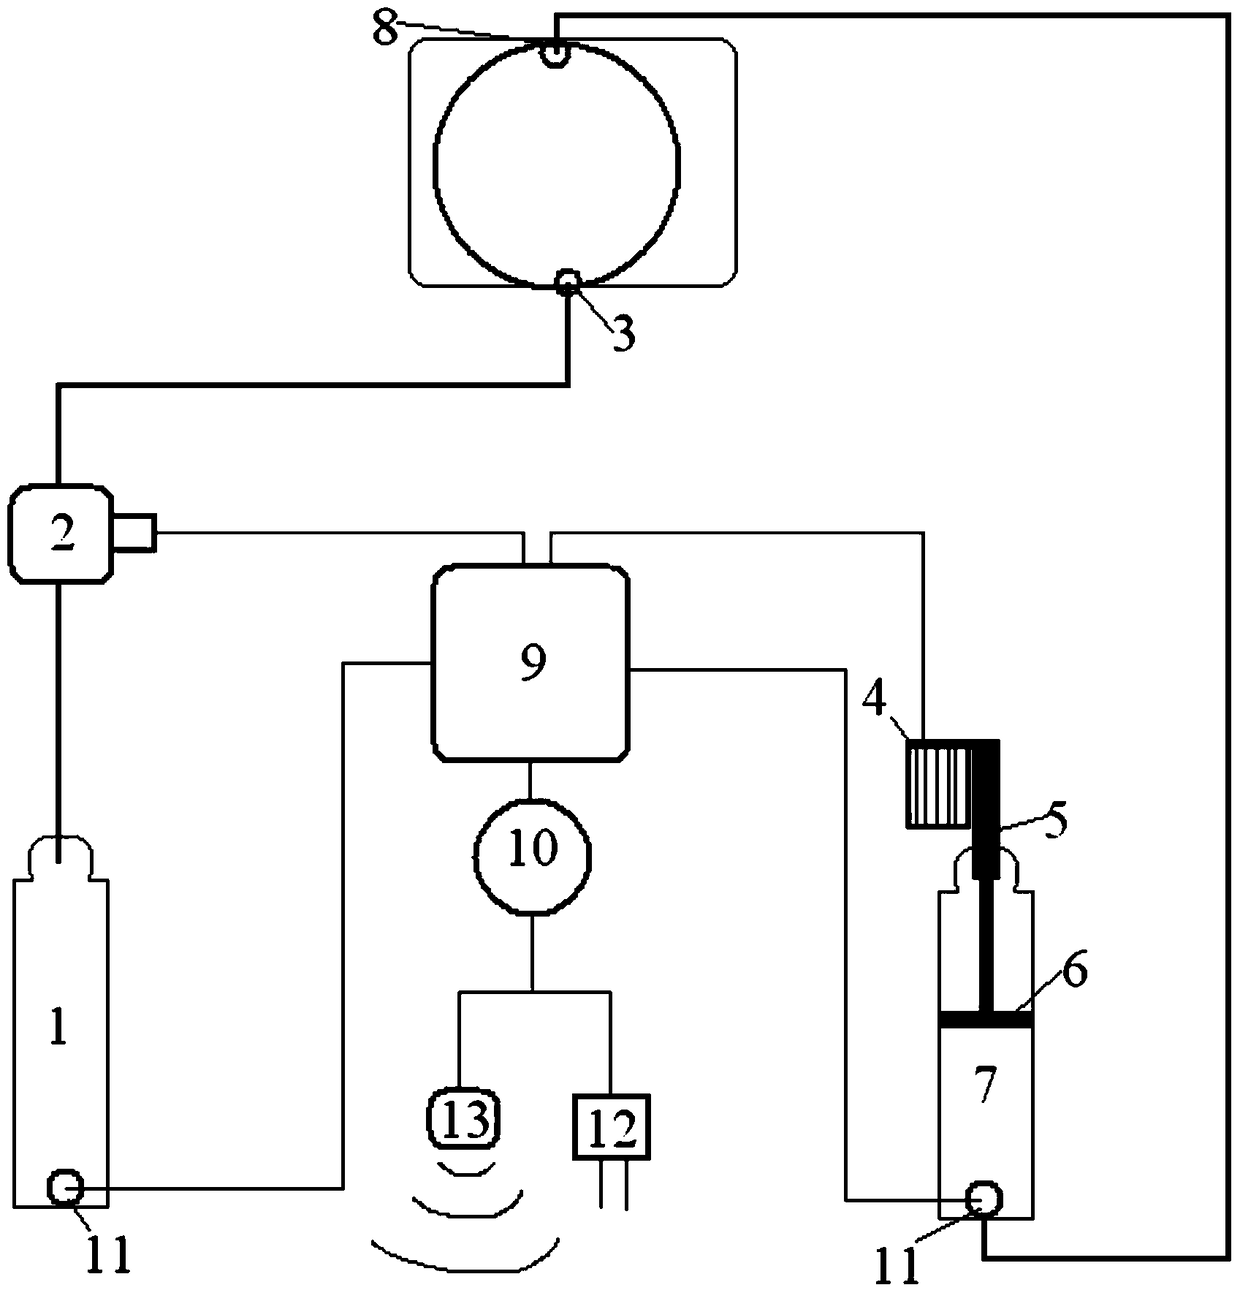 An automatic grease-suction and grease-injection device and method for bearing lubrication